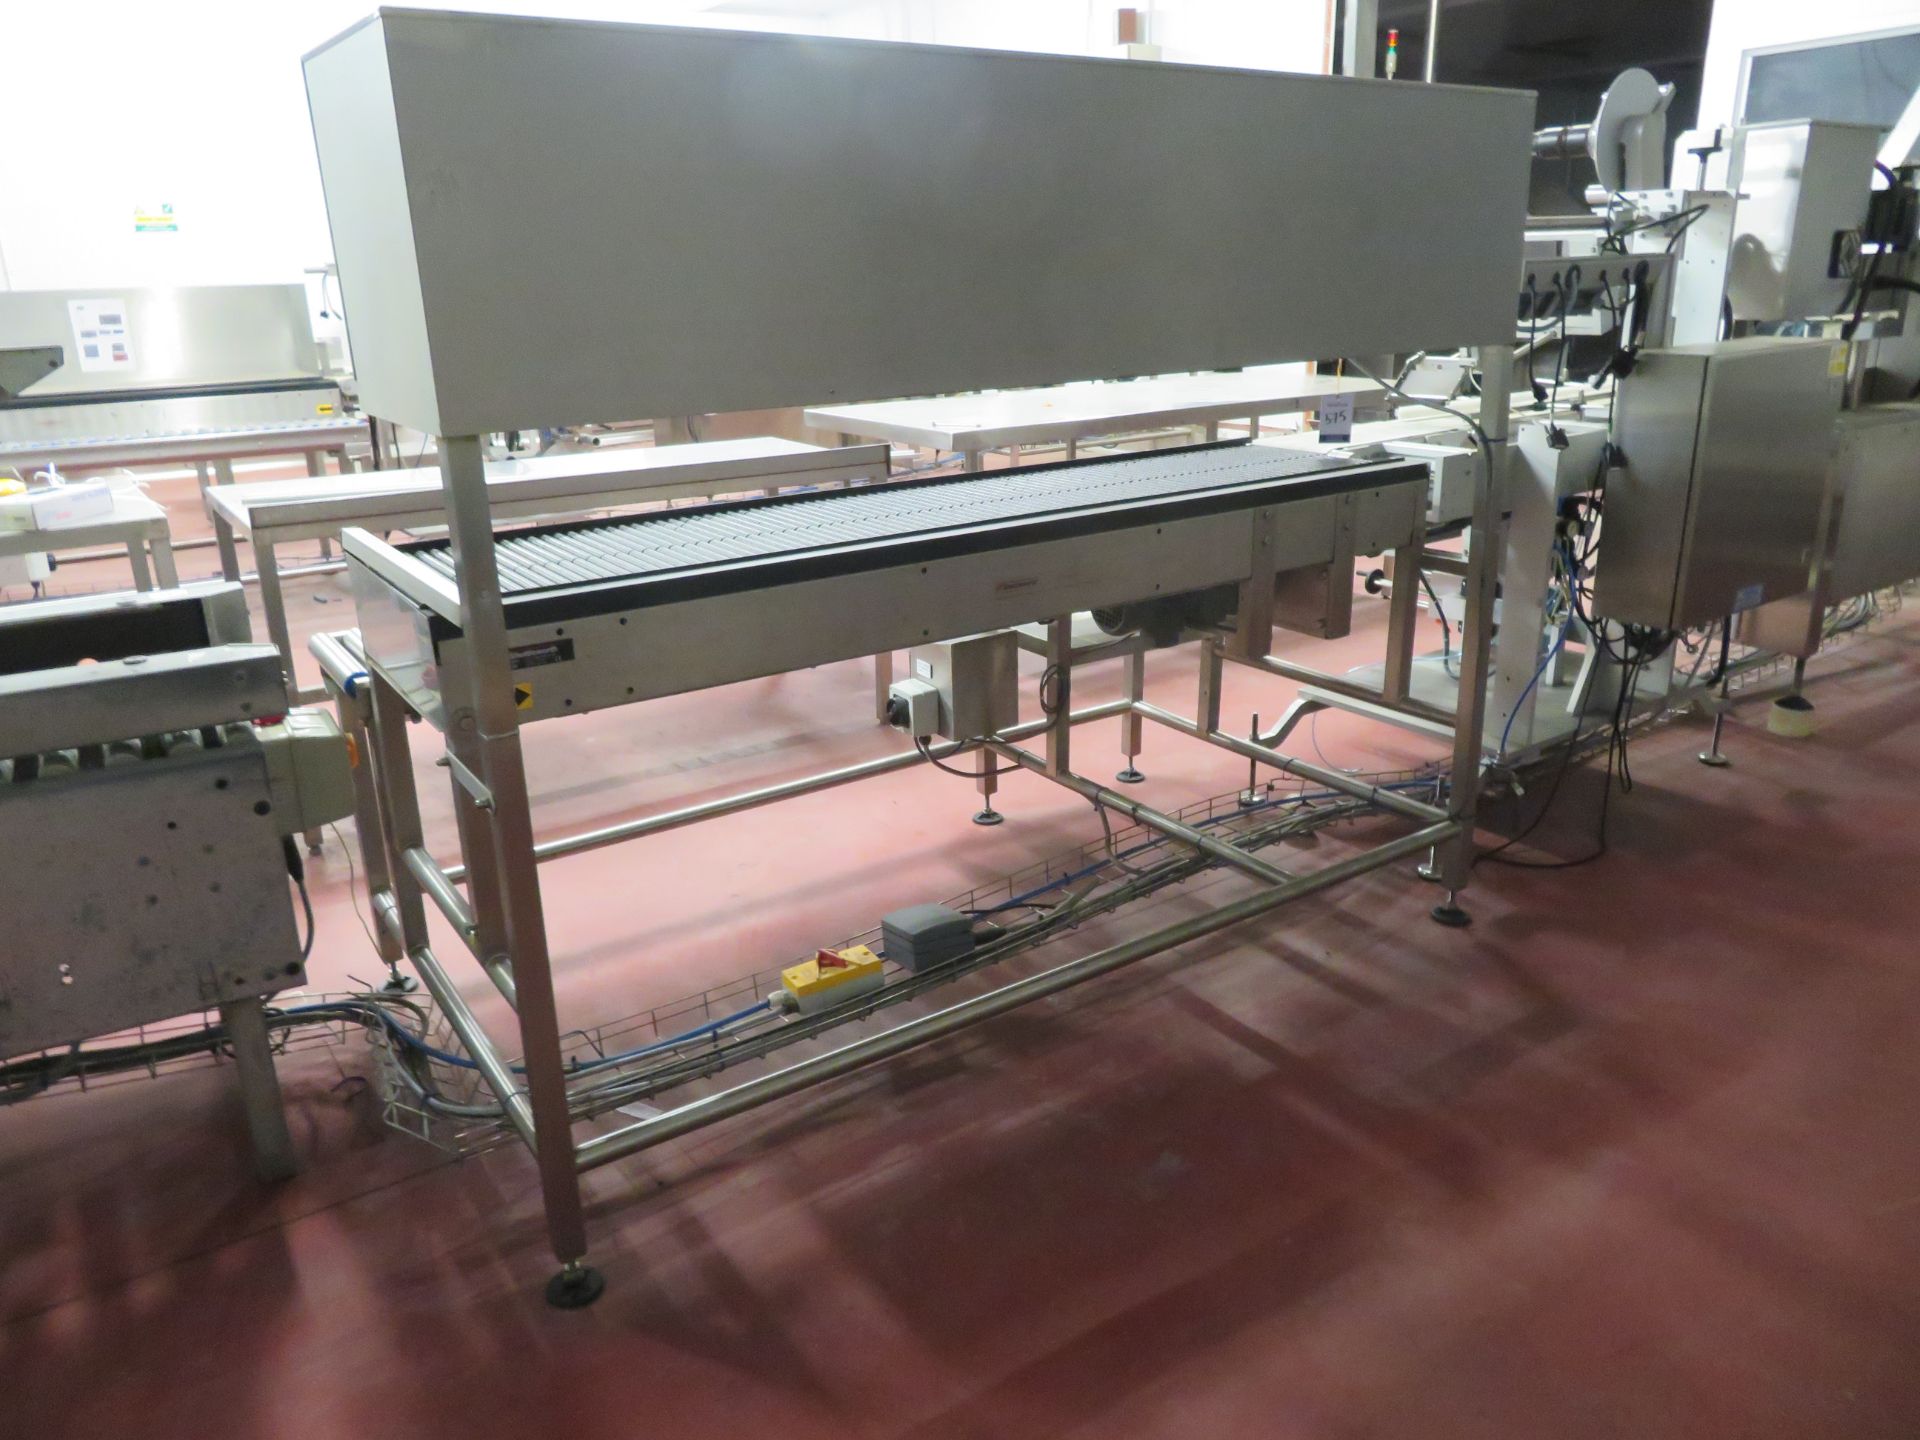 Shuttleworth slip Torque conveyor and Packaging station. - Image 5 of 6